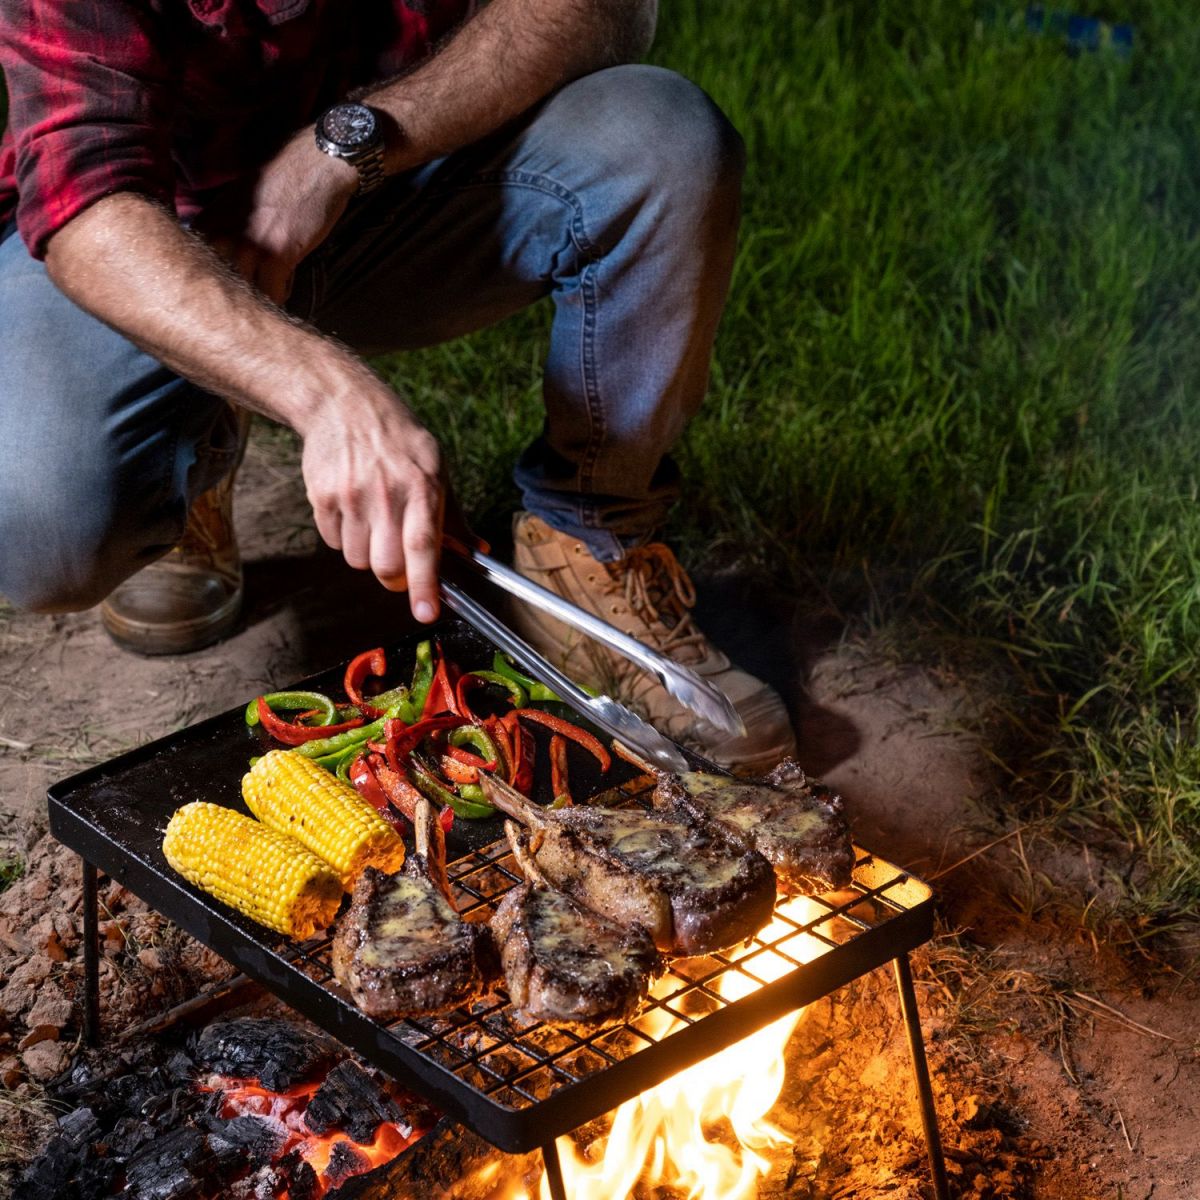 This image shows a man cooking on a Portable Folding Camp Grill and Hotplate